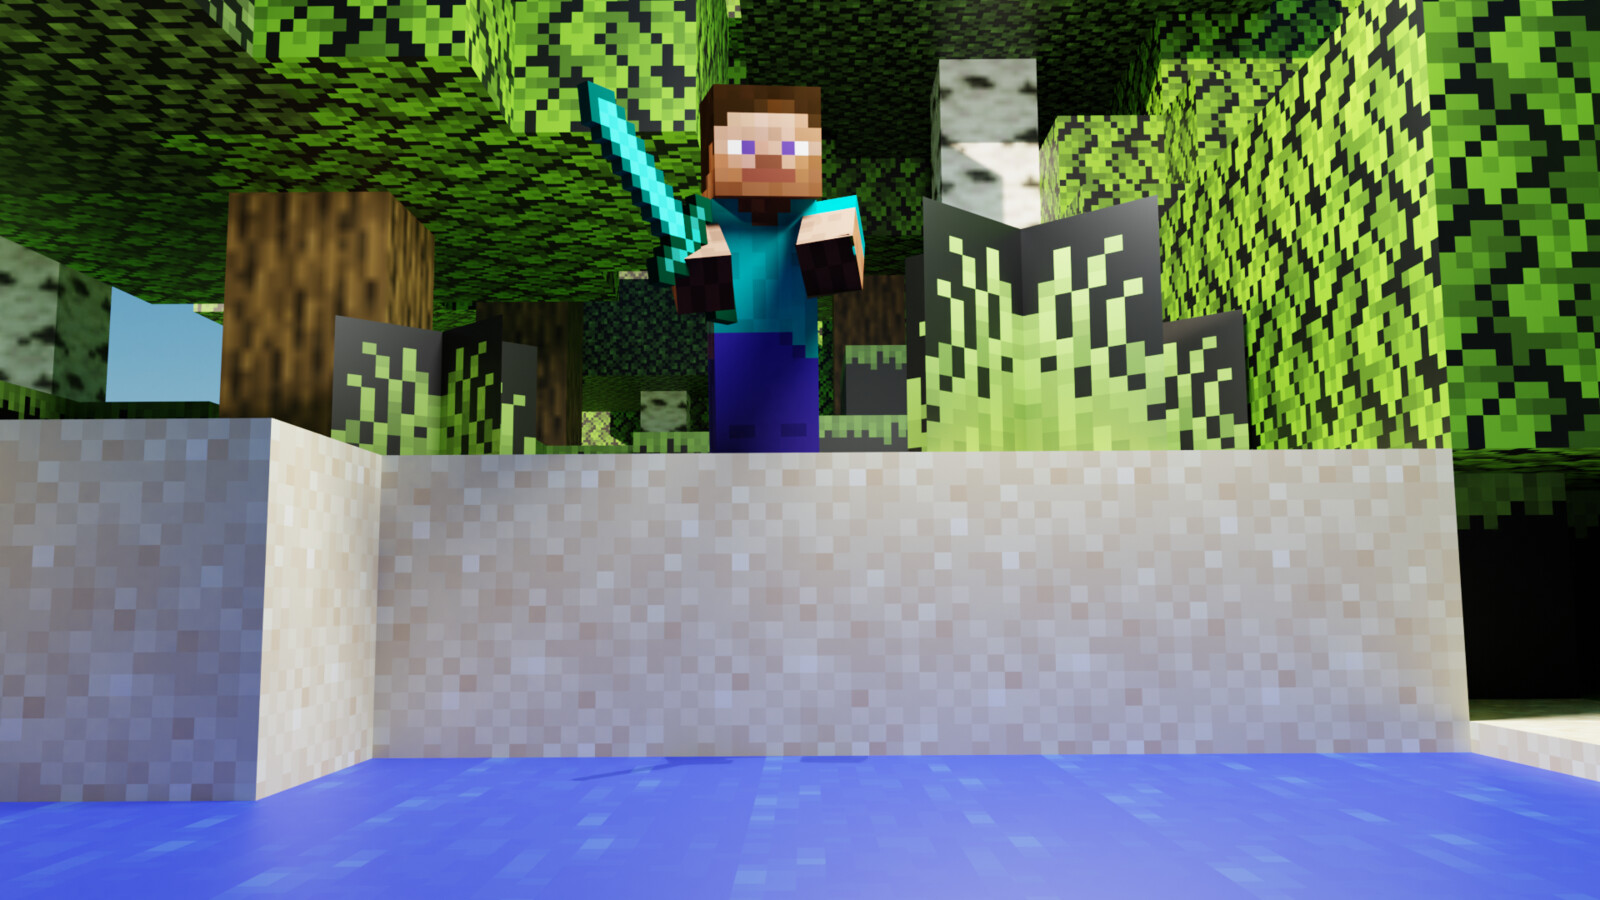 Steve From Minecraft with the diamond sword